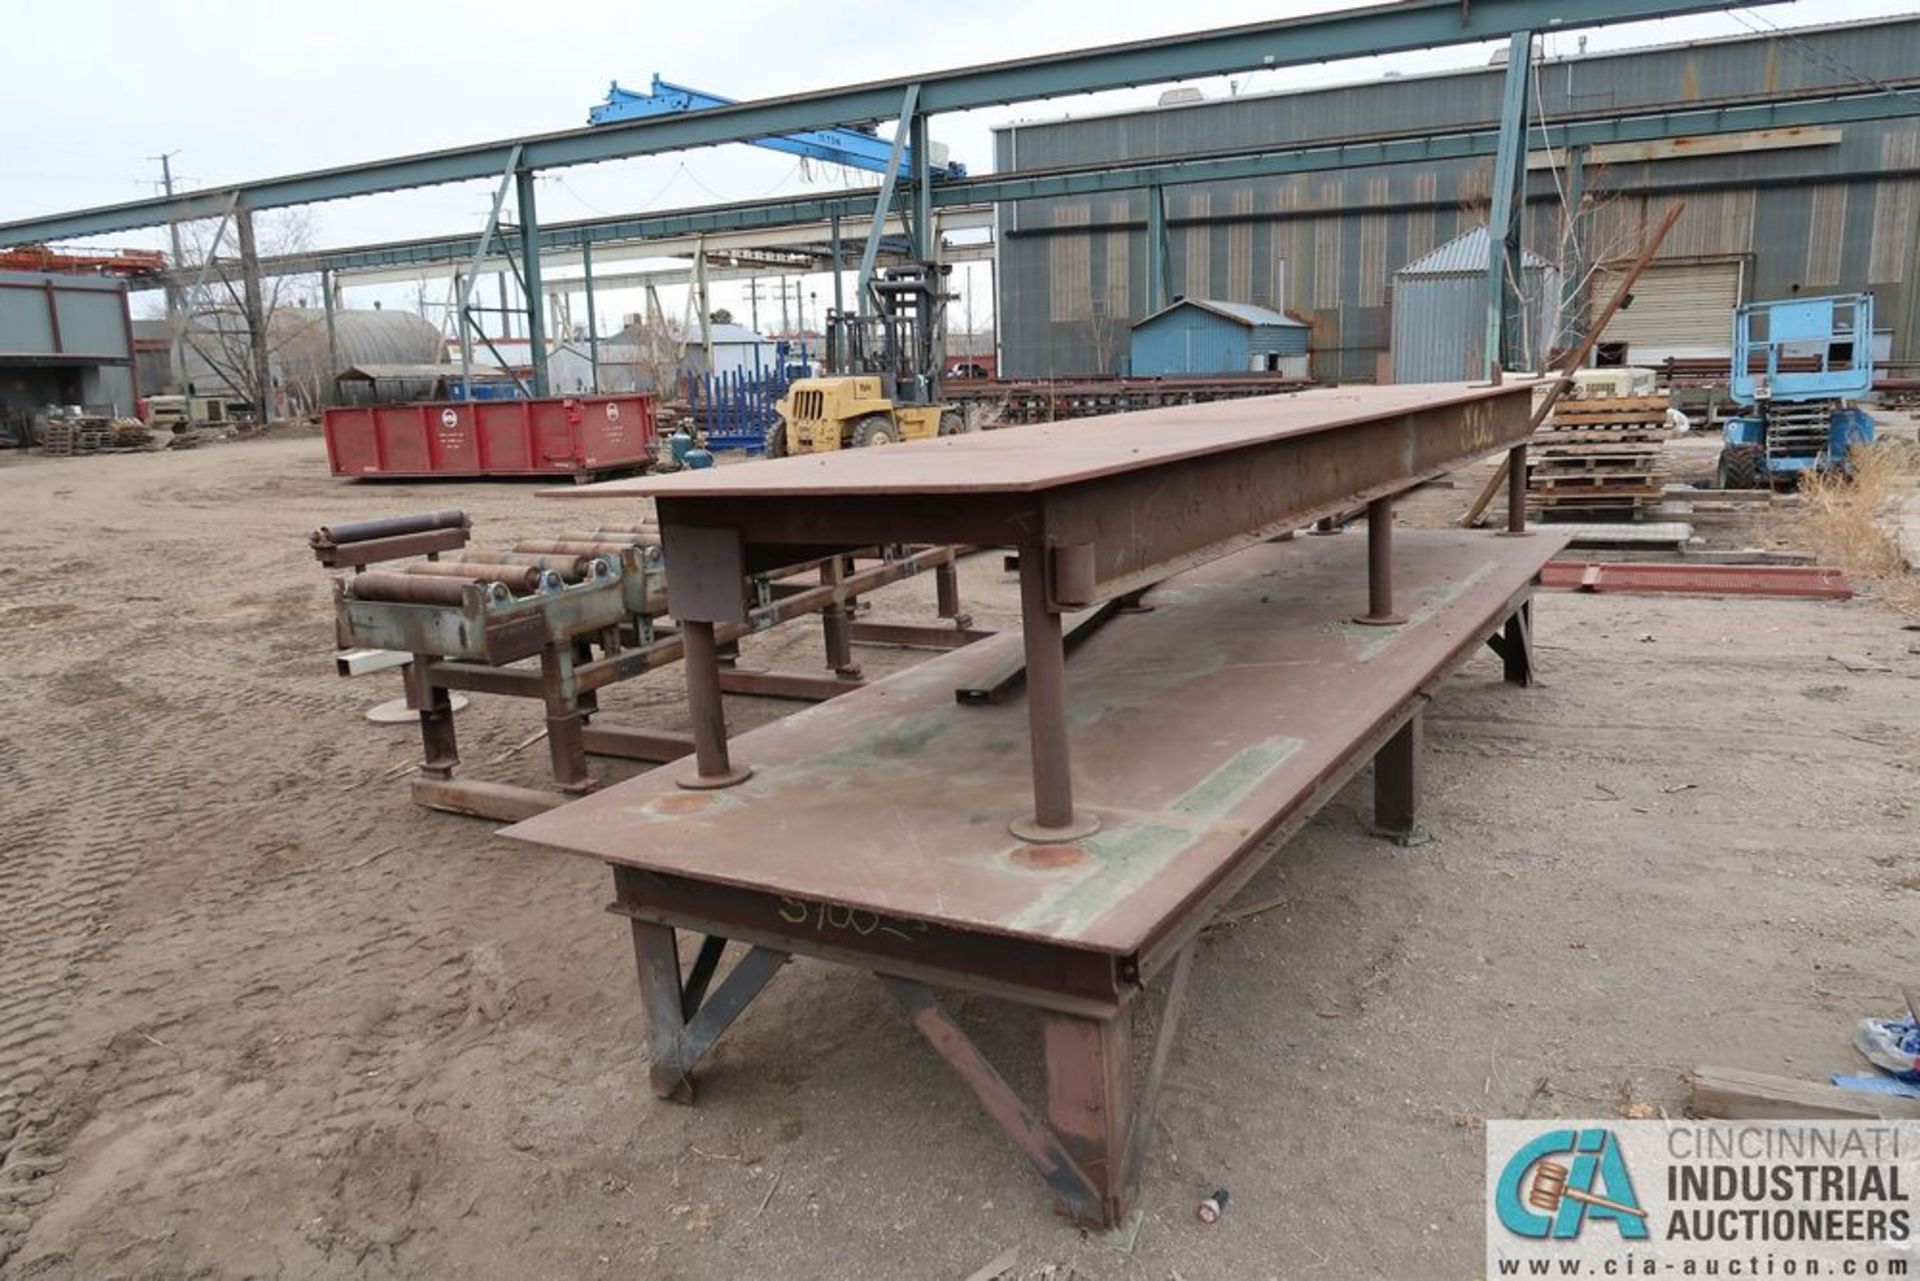 20' X 6' X 20' X 5' HEAVY DUTY STEEL WELDING TABLE (TOP TABLE ONLY) - Image 2 of 2